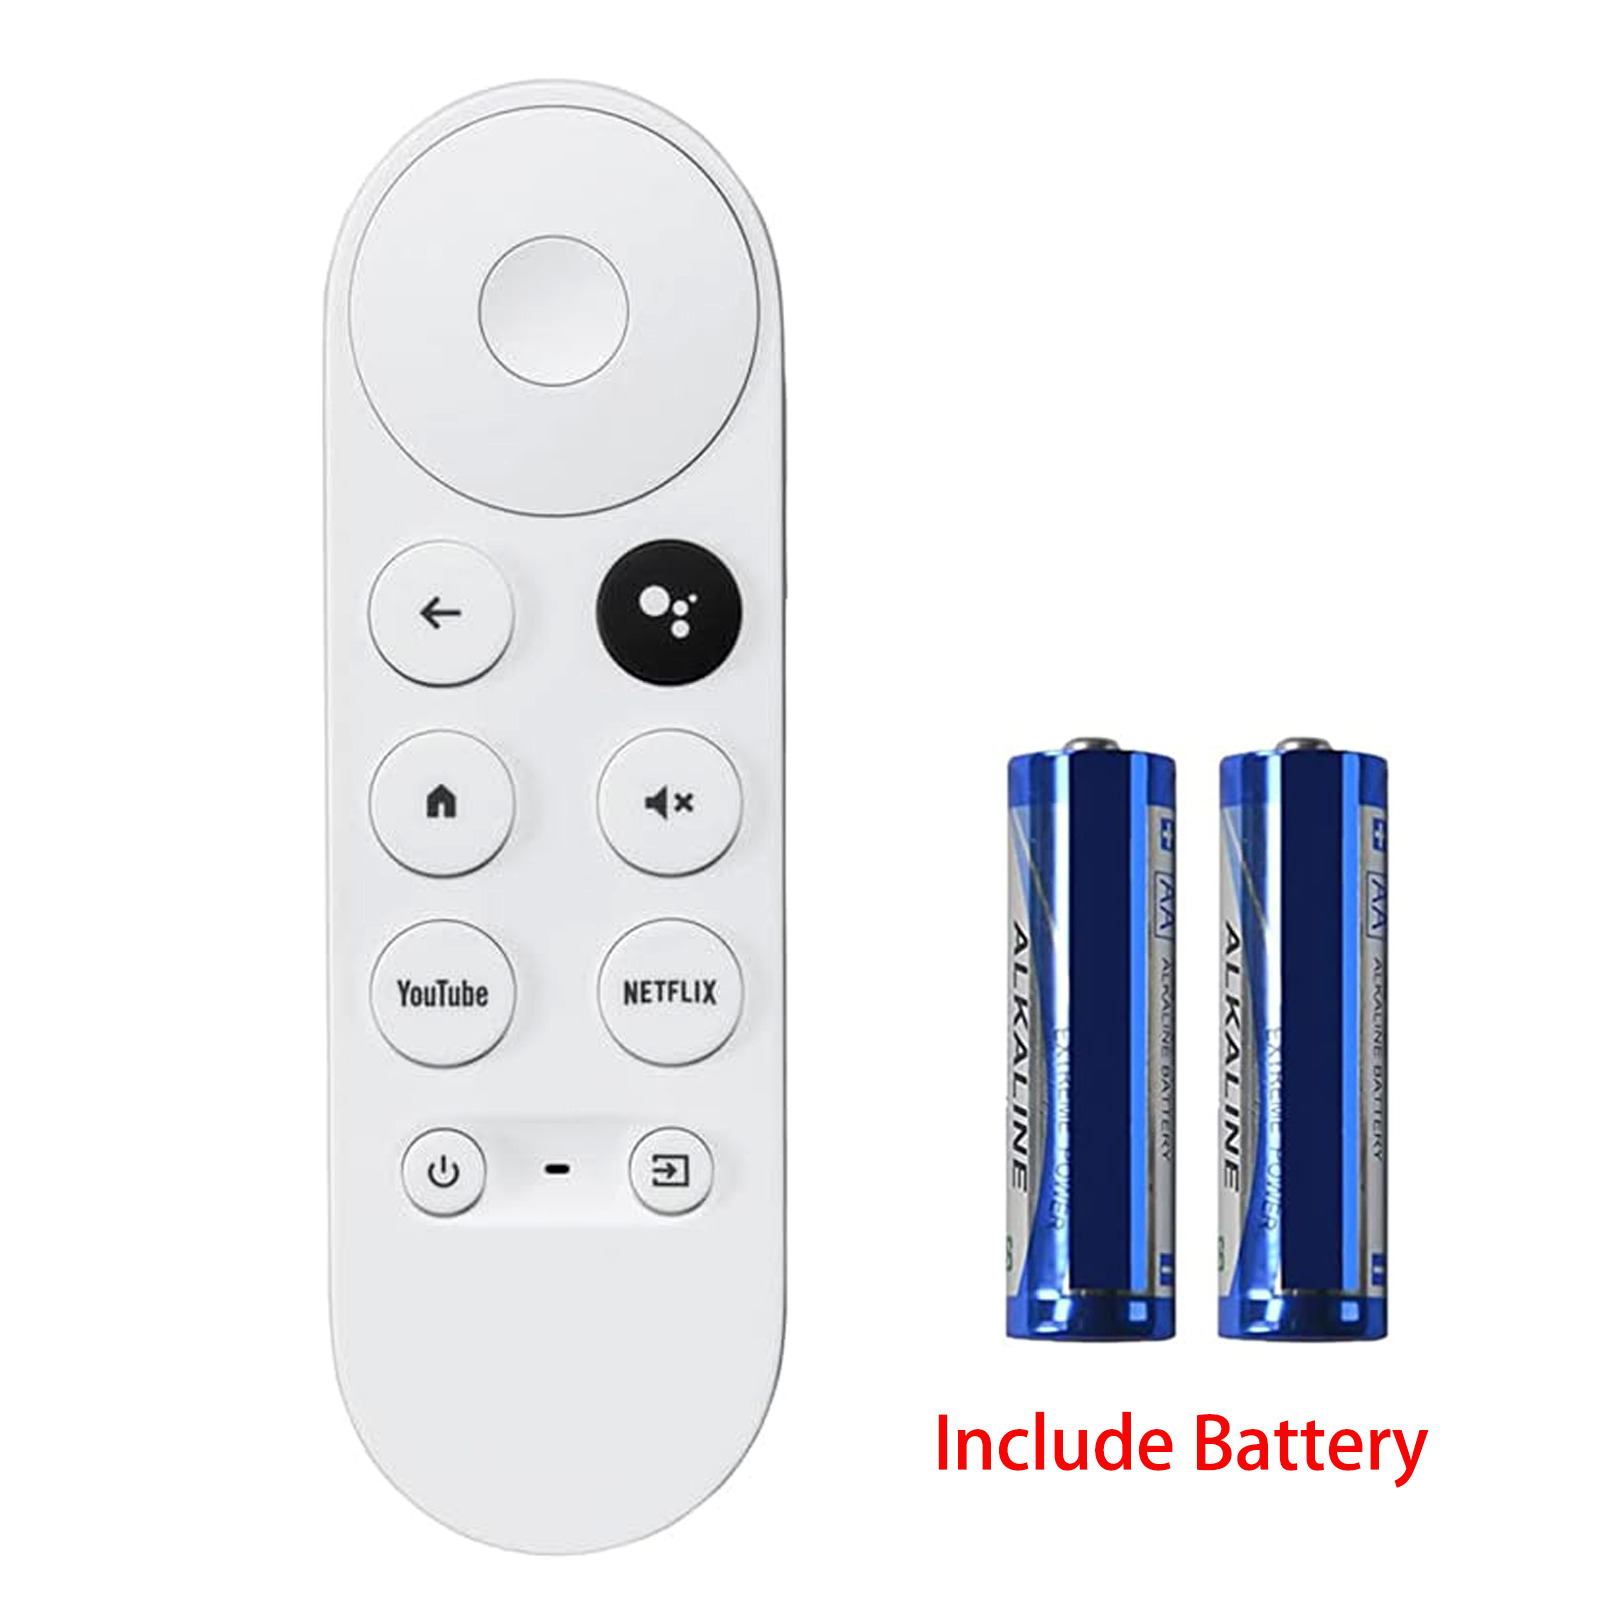 New Replacement Remote Control for Chromecast Google TV --Include Battery🔋🔋